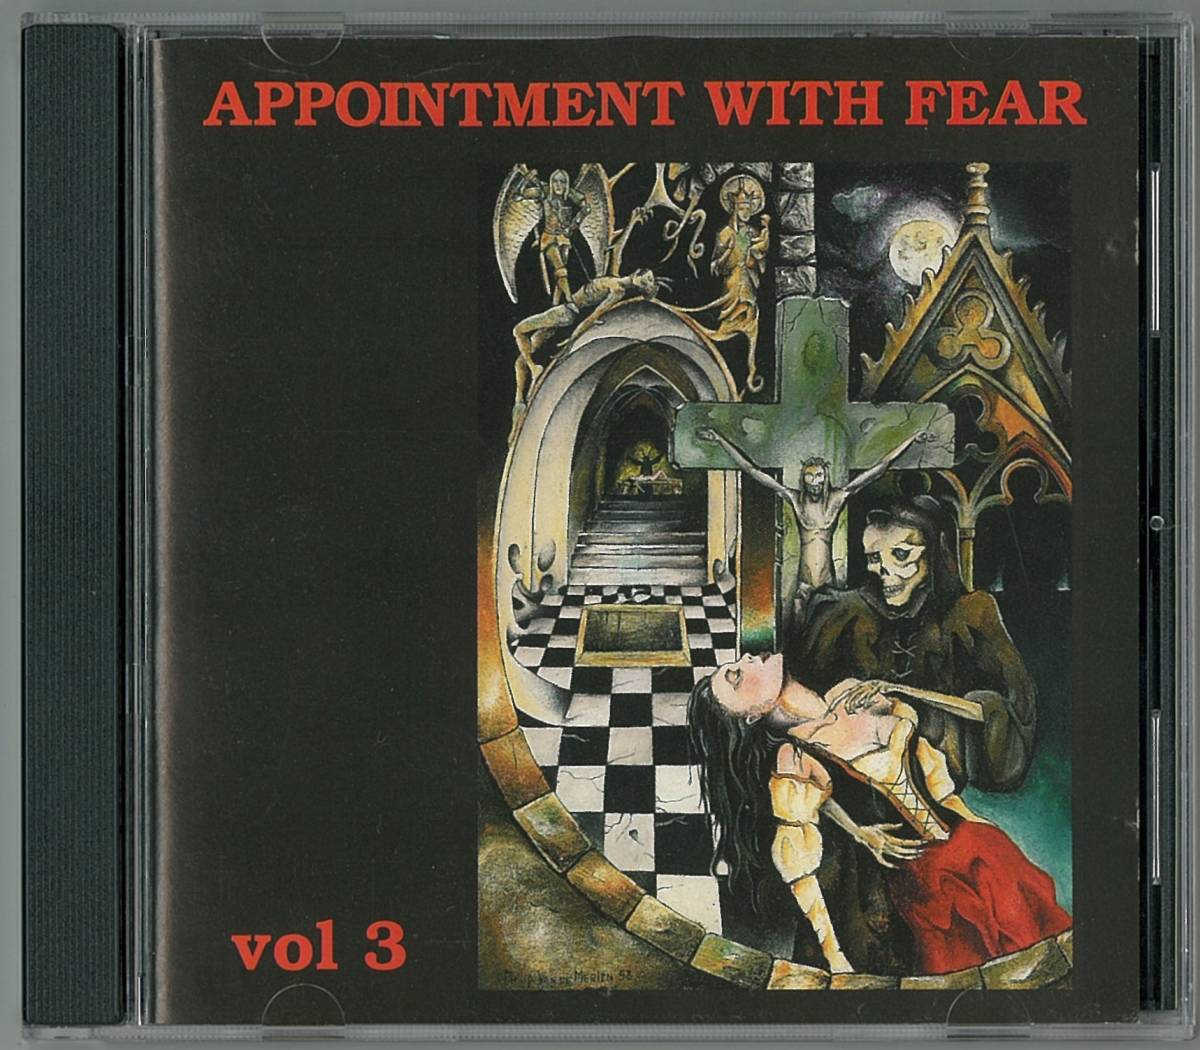 V.A ／ APPOINTMENT WITH FEAR　Vol.3　輸入盤ＣＤ　HUMAN WASTE　他　　検～ grind morbid angel napalm death carcass deicide obituary_画像1